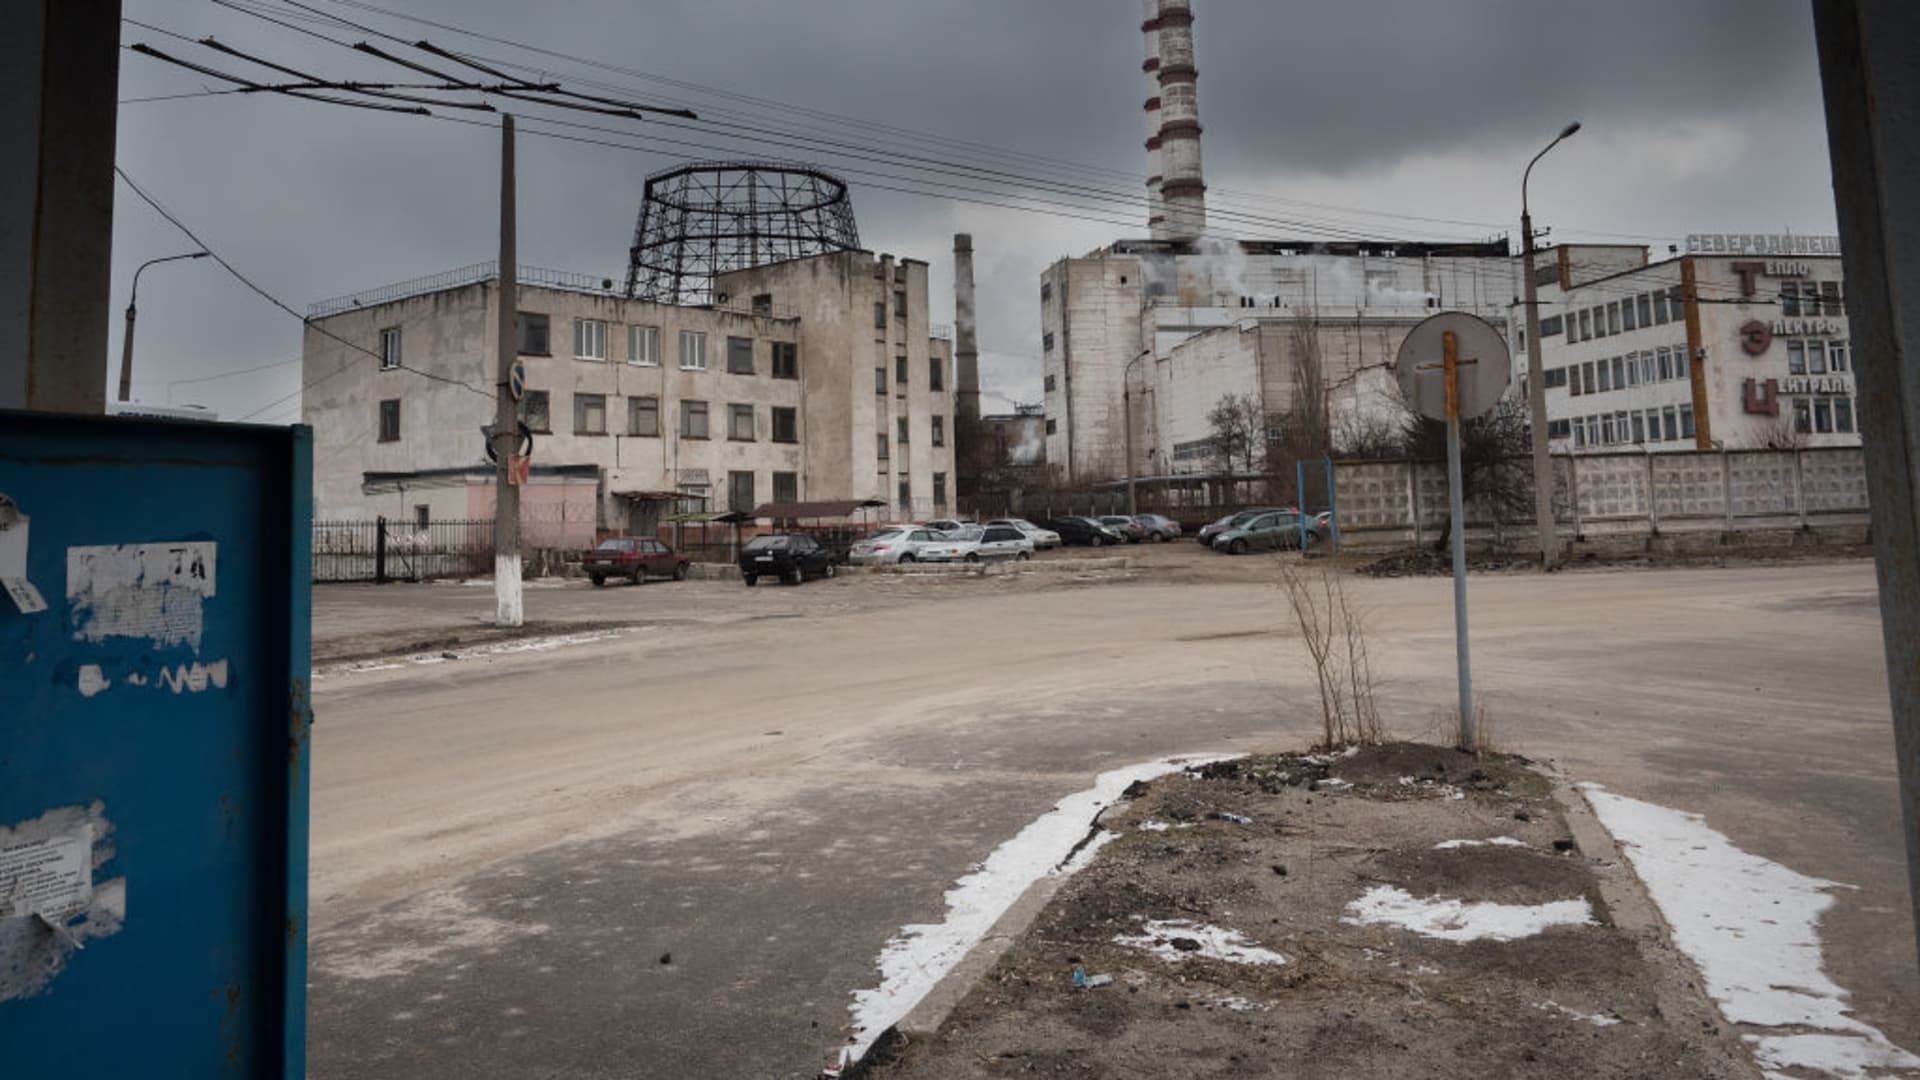 Before the war: Here's what the Azot Chemical Plant looked like in 2021 in Severodonetsk, Ukraine. Hundreds of civilians are believed to be shelting here as the battle over Severodonetsk intensifies.